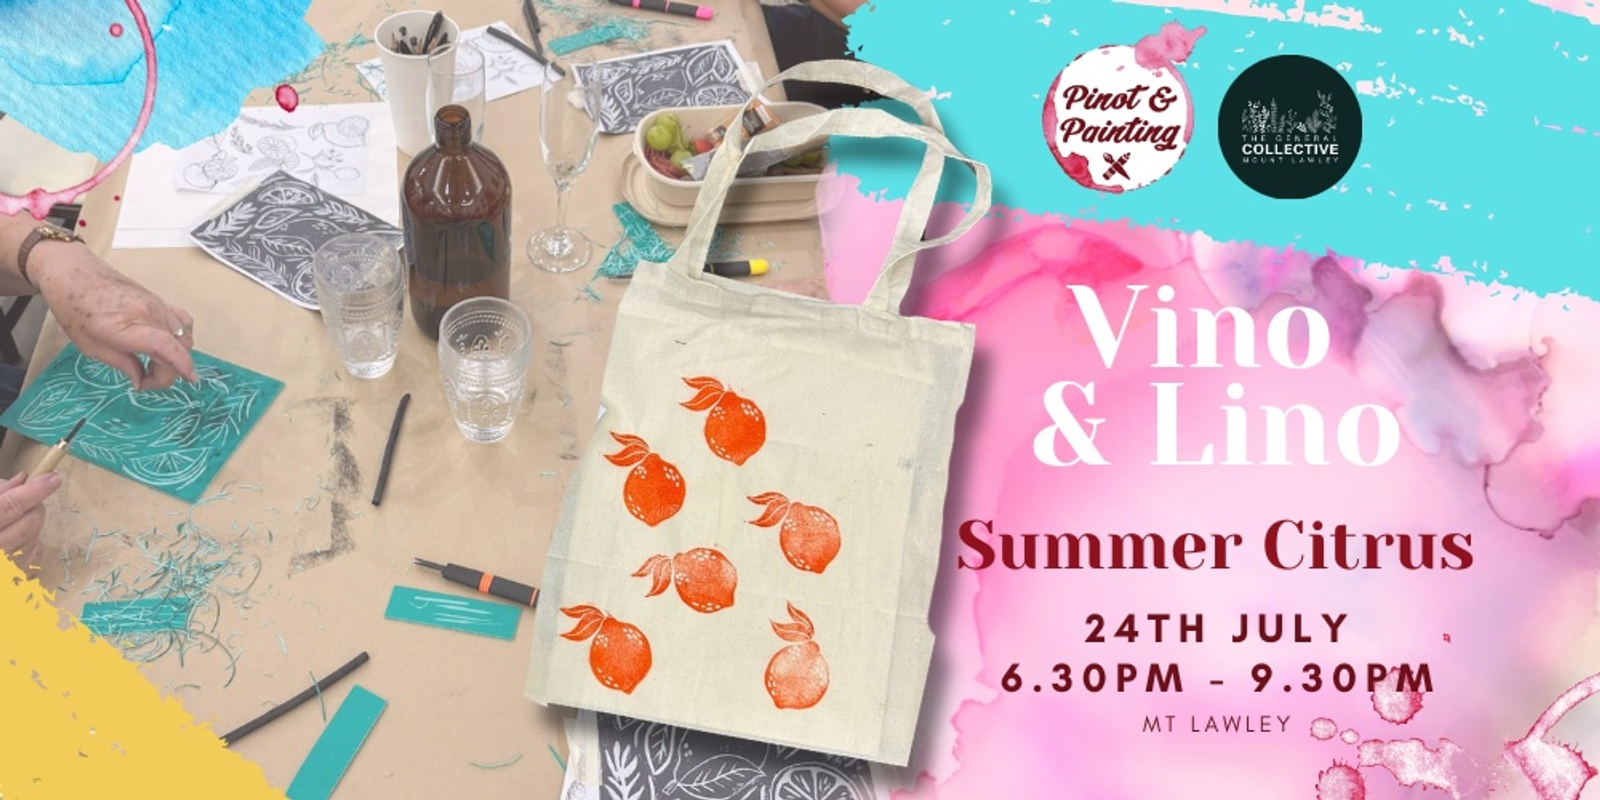 Banner image for Vino & Lino: Summer Citrus (Tote Bags & Cards) @ The General Collective 